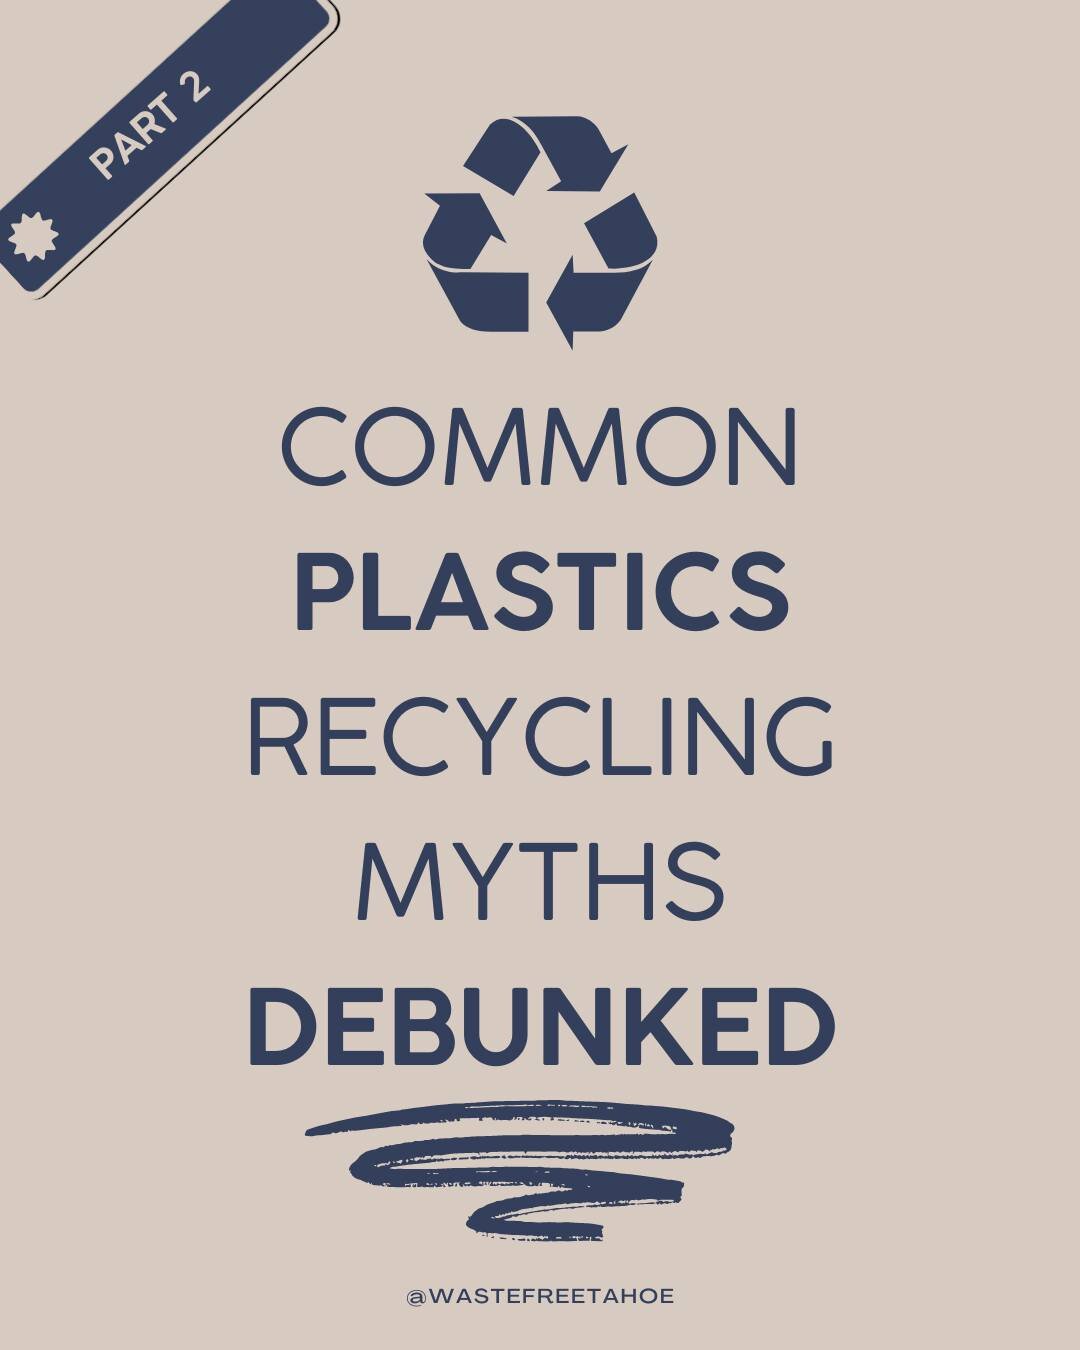 Second part of the common plastics recycling myths series! We hear a lot of things about plastics' recycling so we thought we'd share some of them with you. Keep reading to learn more ♻️ and stay tuned for more parts of the series!

False: Plastics d